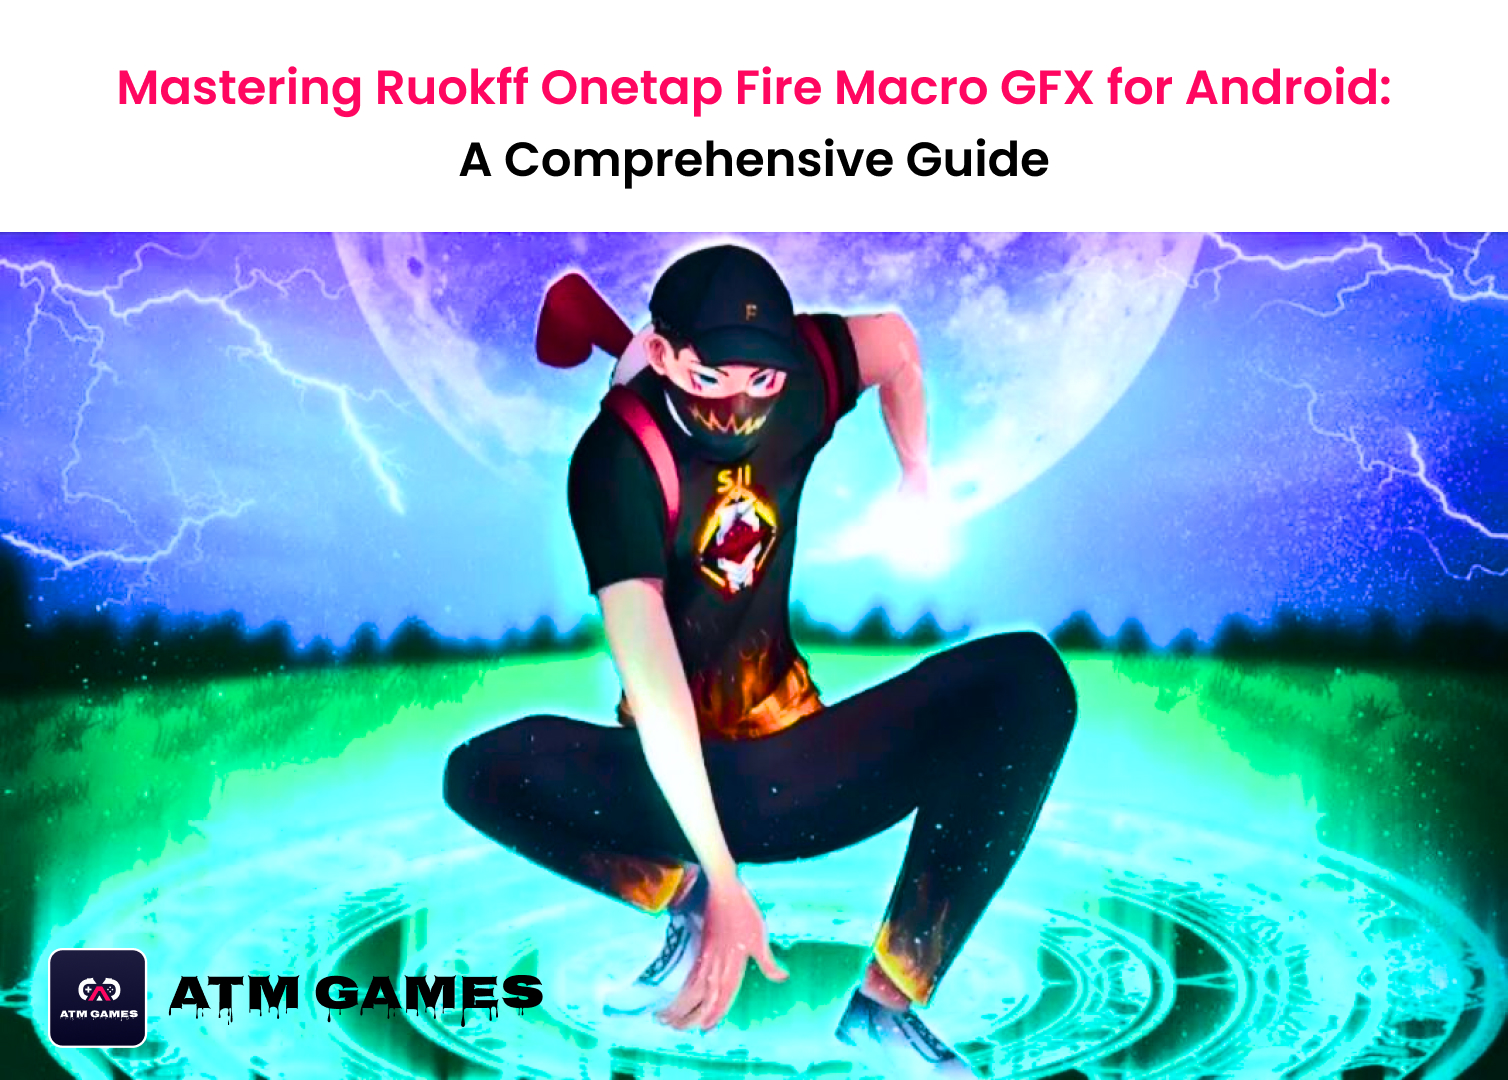 Mastering Ruokff Onetap Fire Macro GFX for Android: A Comprehensive Guide ATM HTML GAMES